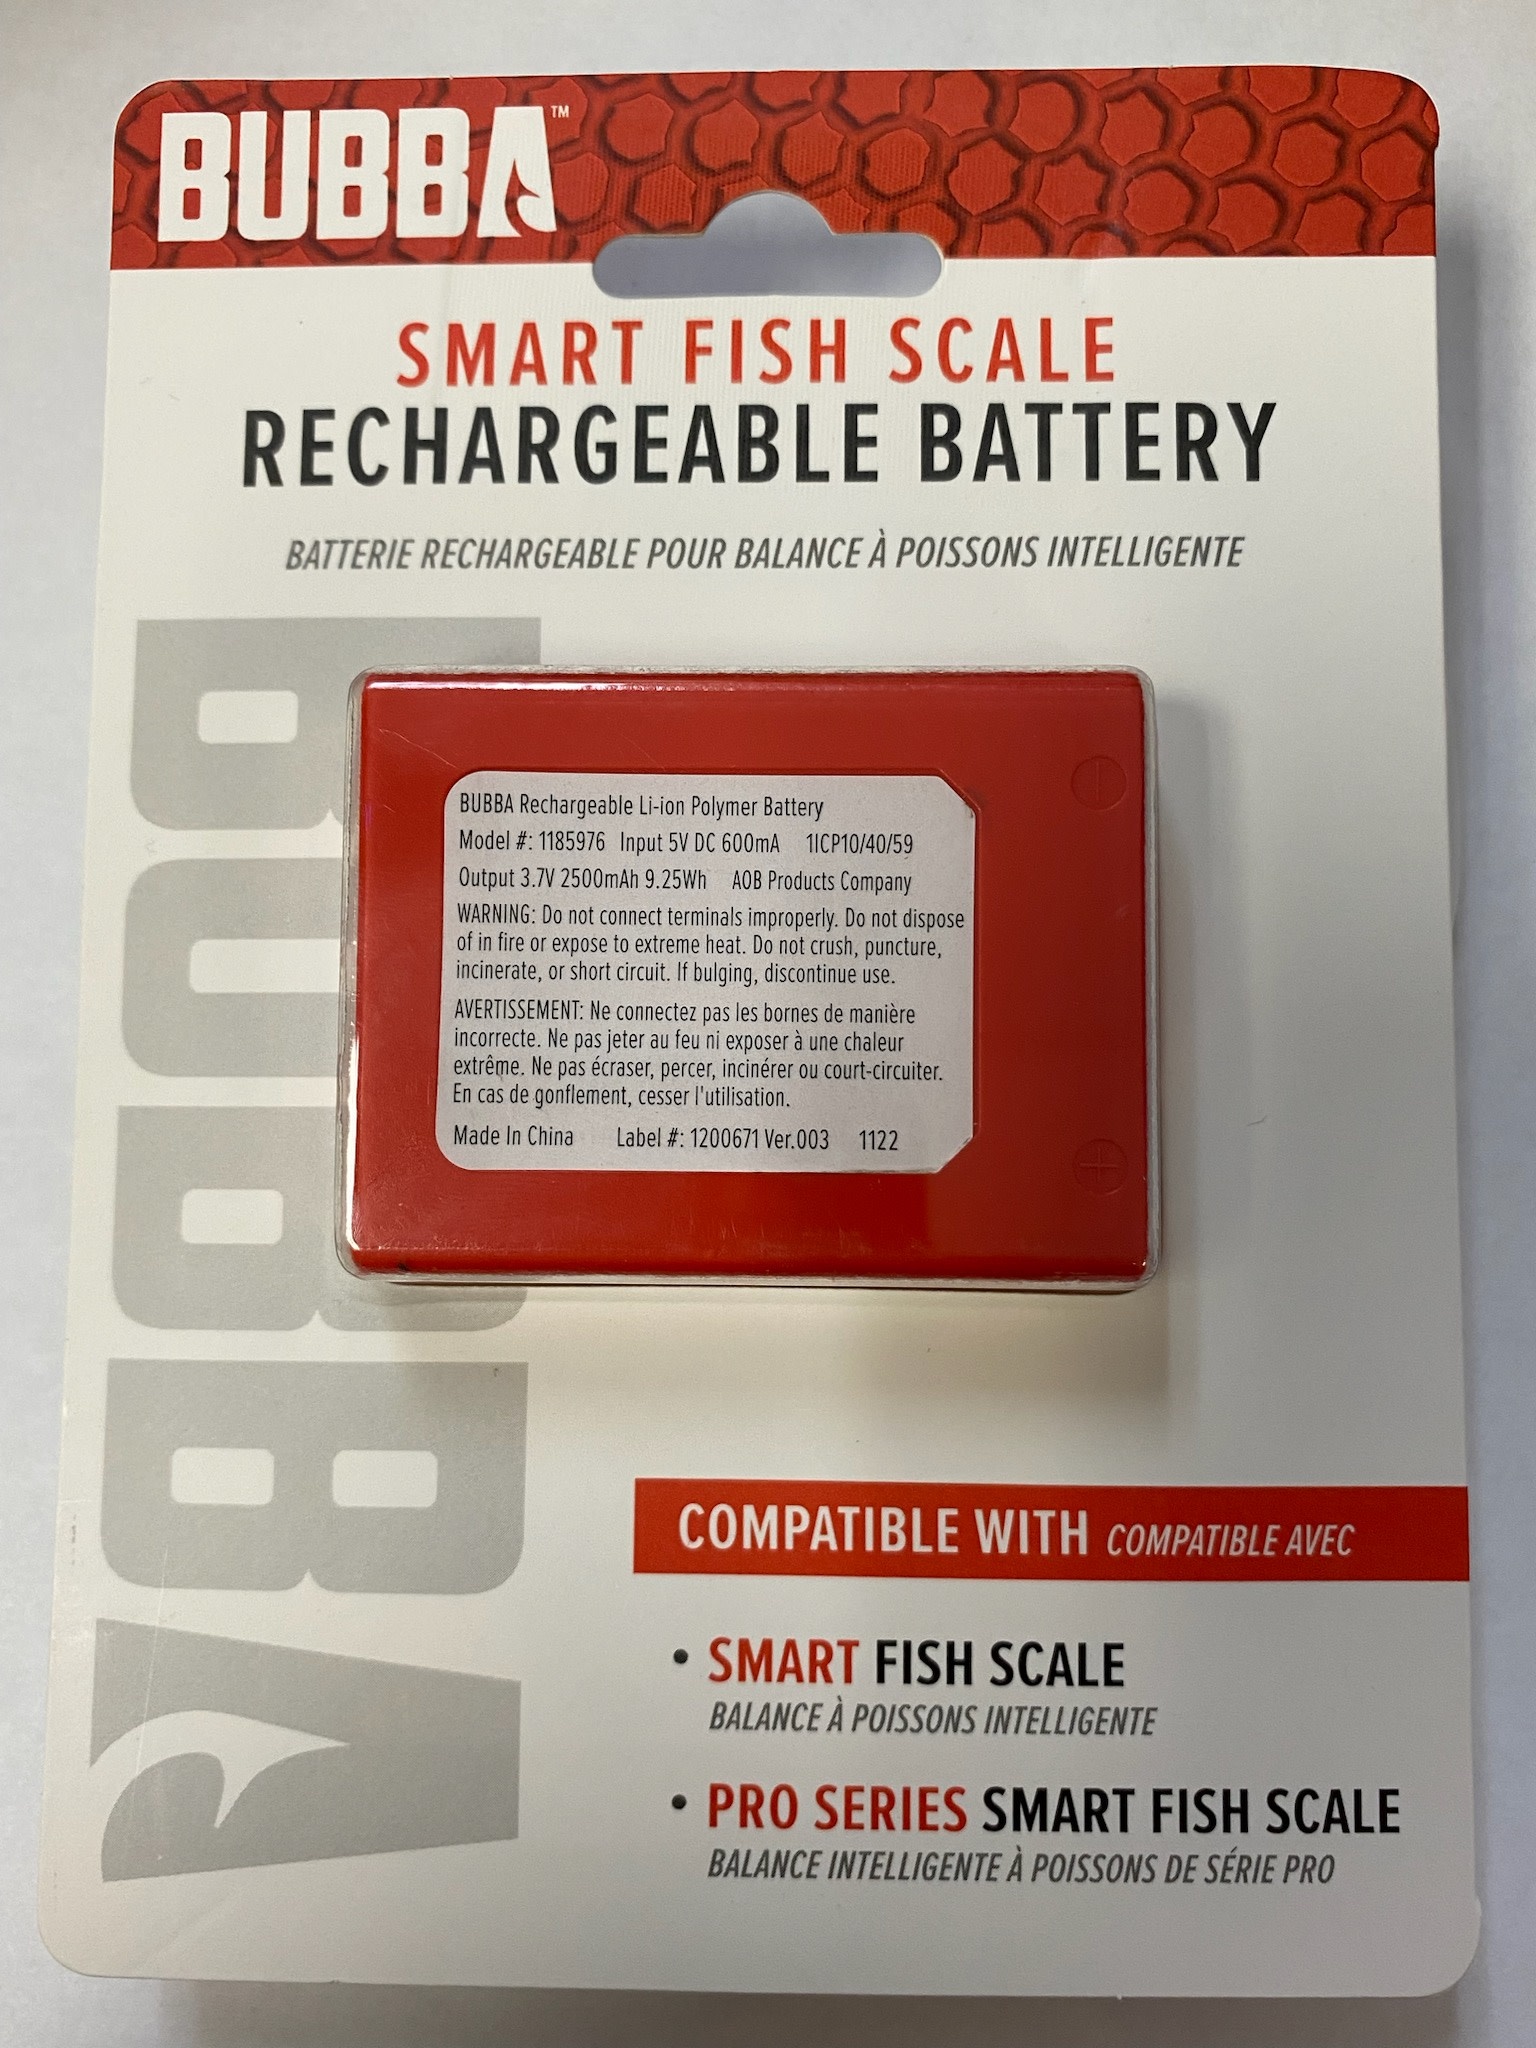 Smart Fish Scale Rechargeable Battery - Modern Outdoor Tackle